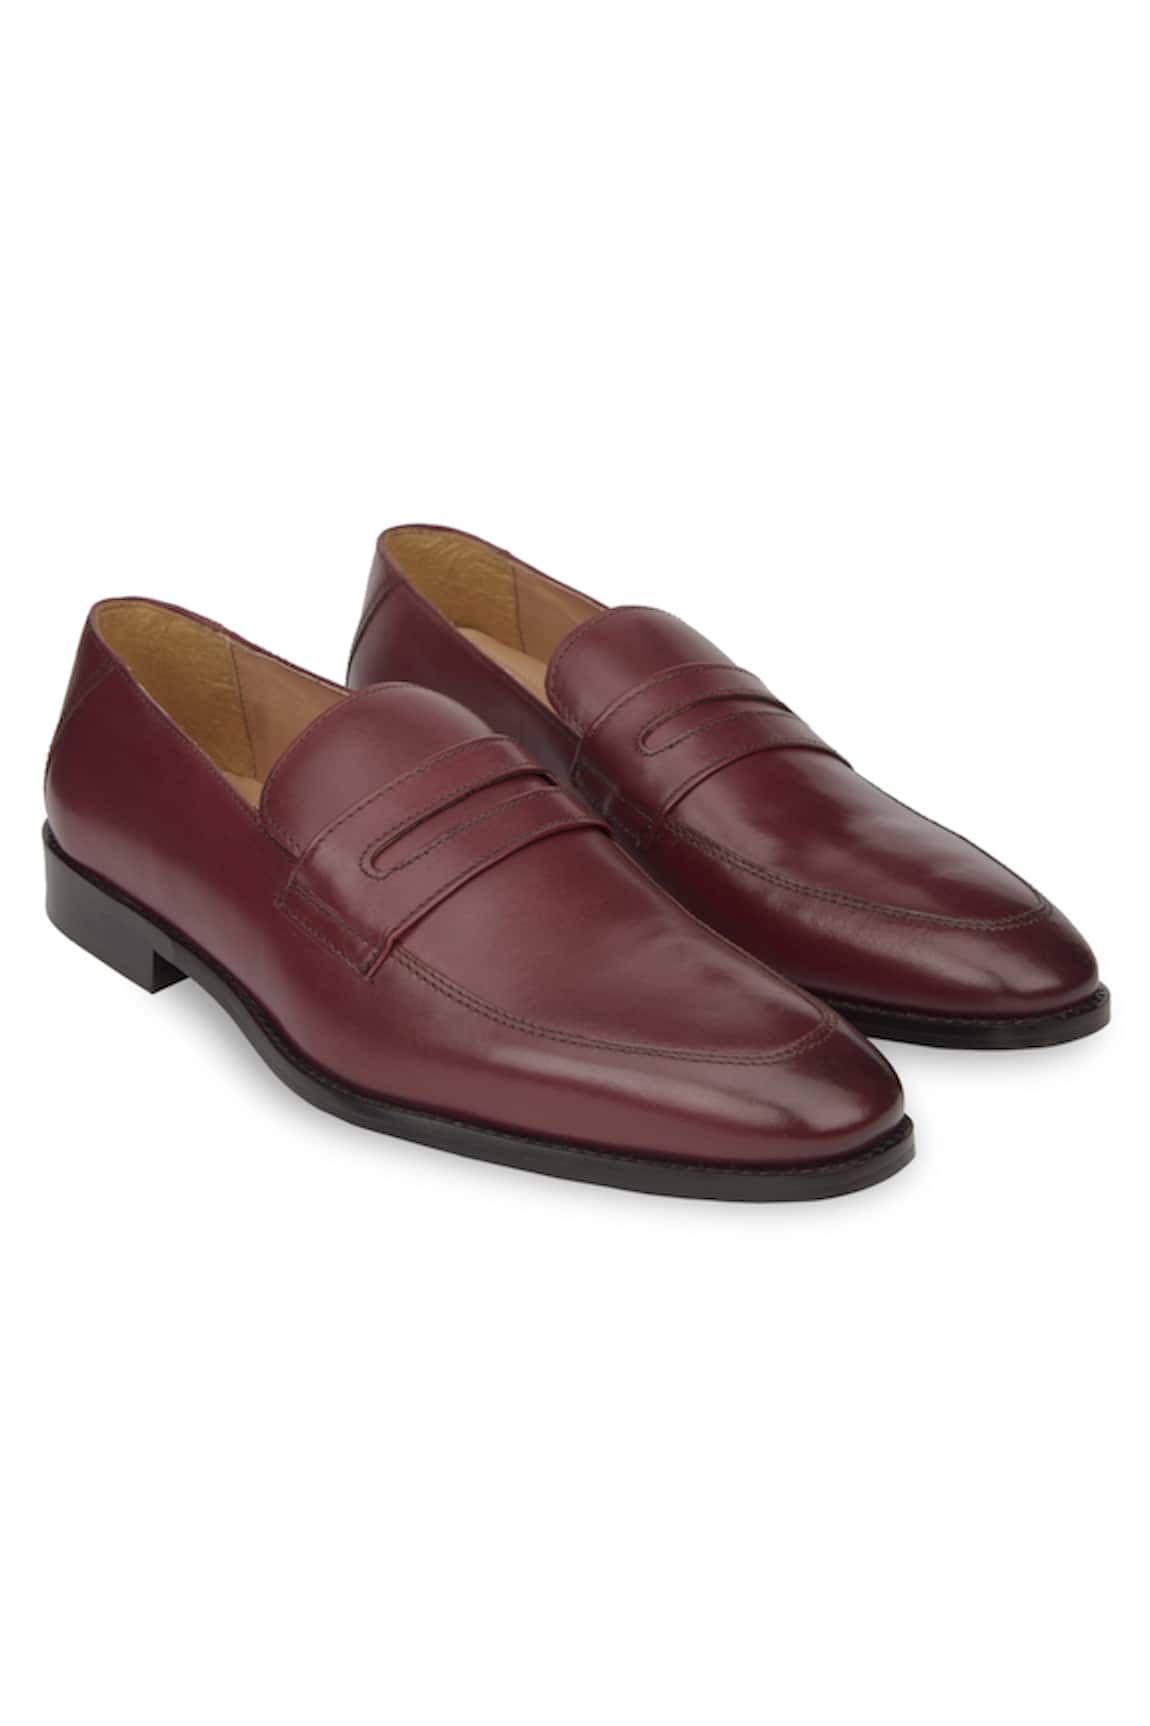 Hats Off Accessories Leather Penny Loafers